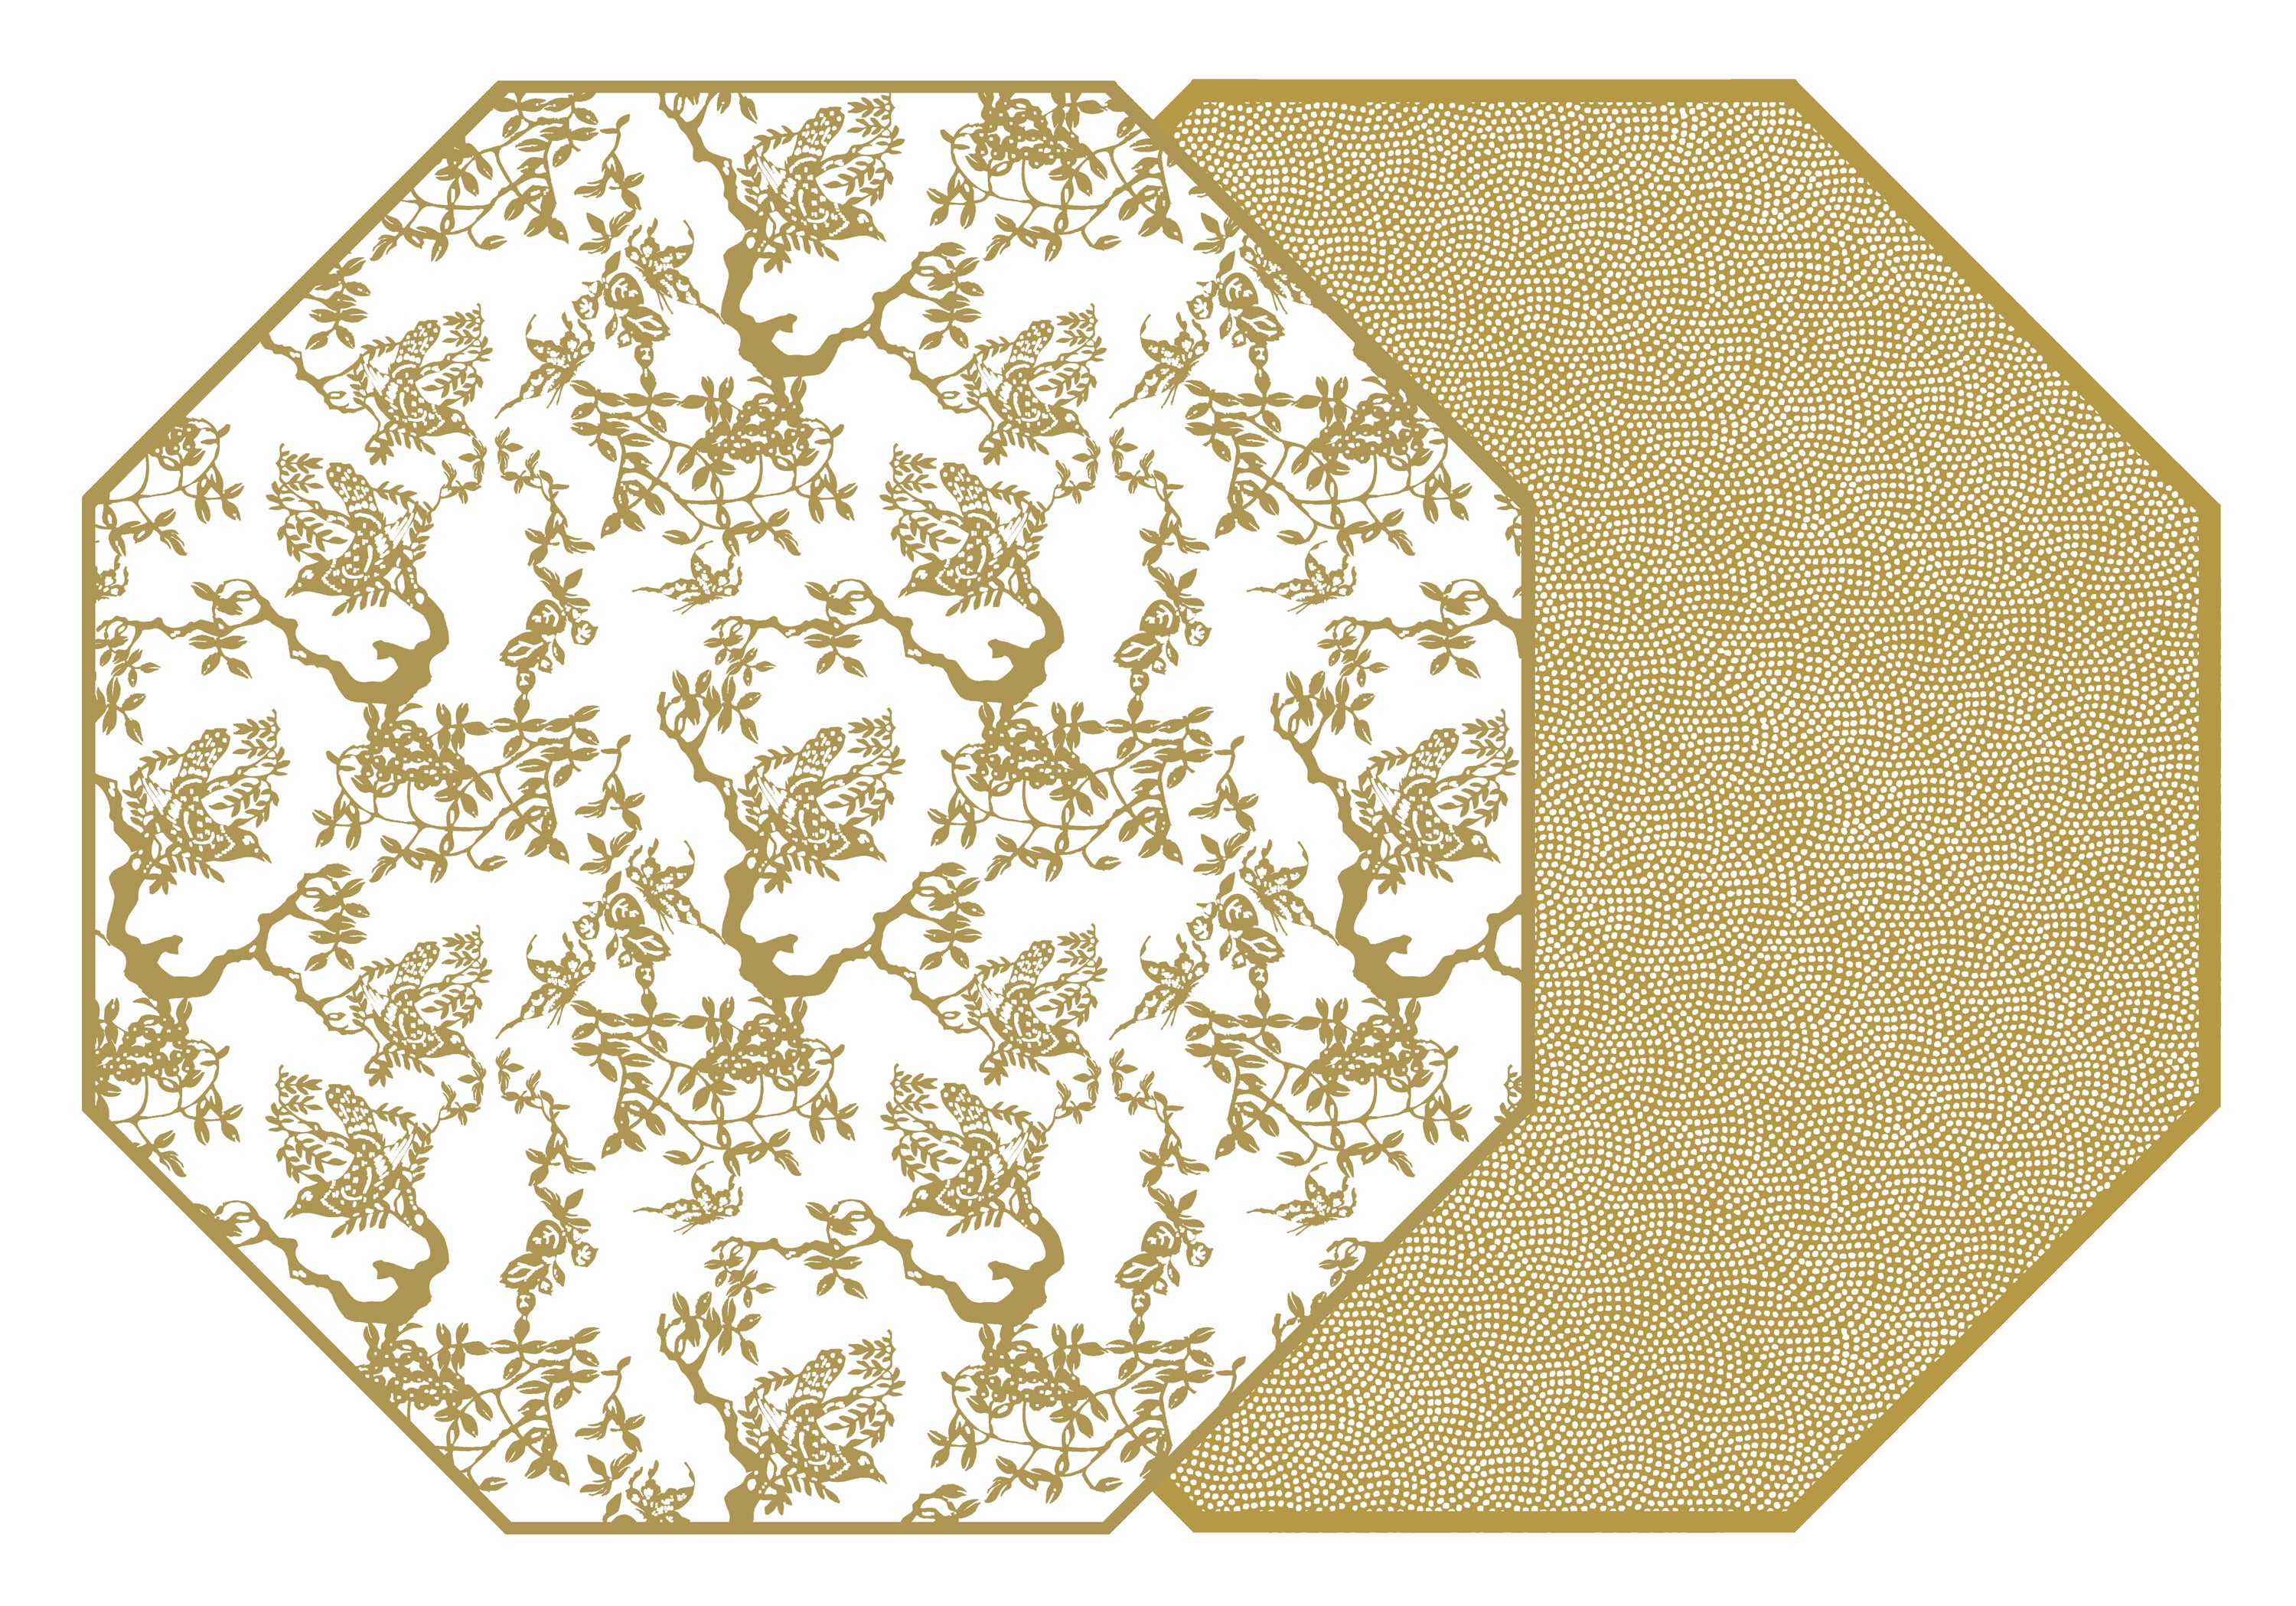 OCTAGONAL TWO SIDED CHINOIS AND DOT FAN PLACEMAT ~ SHIMMER